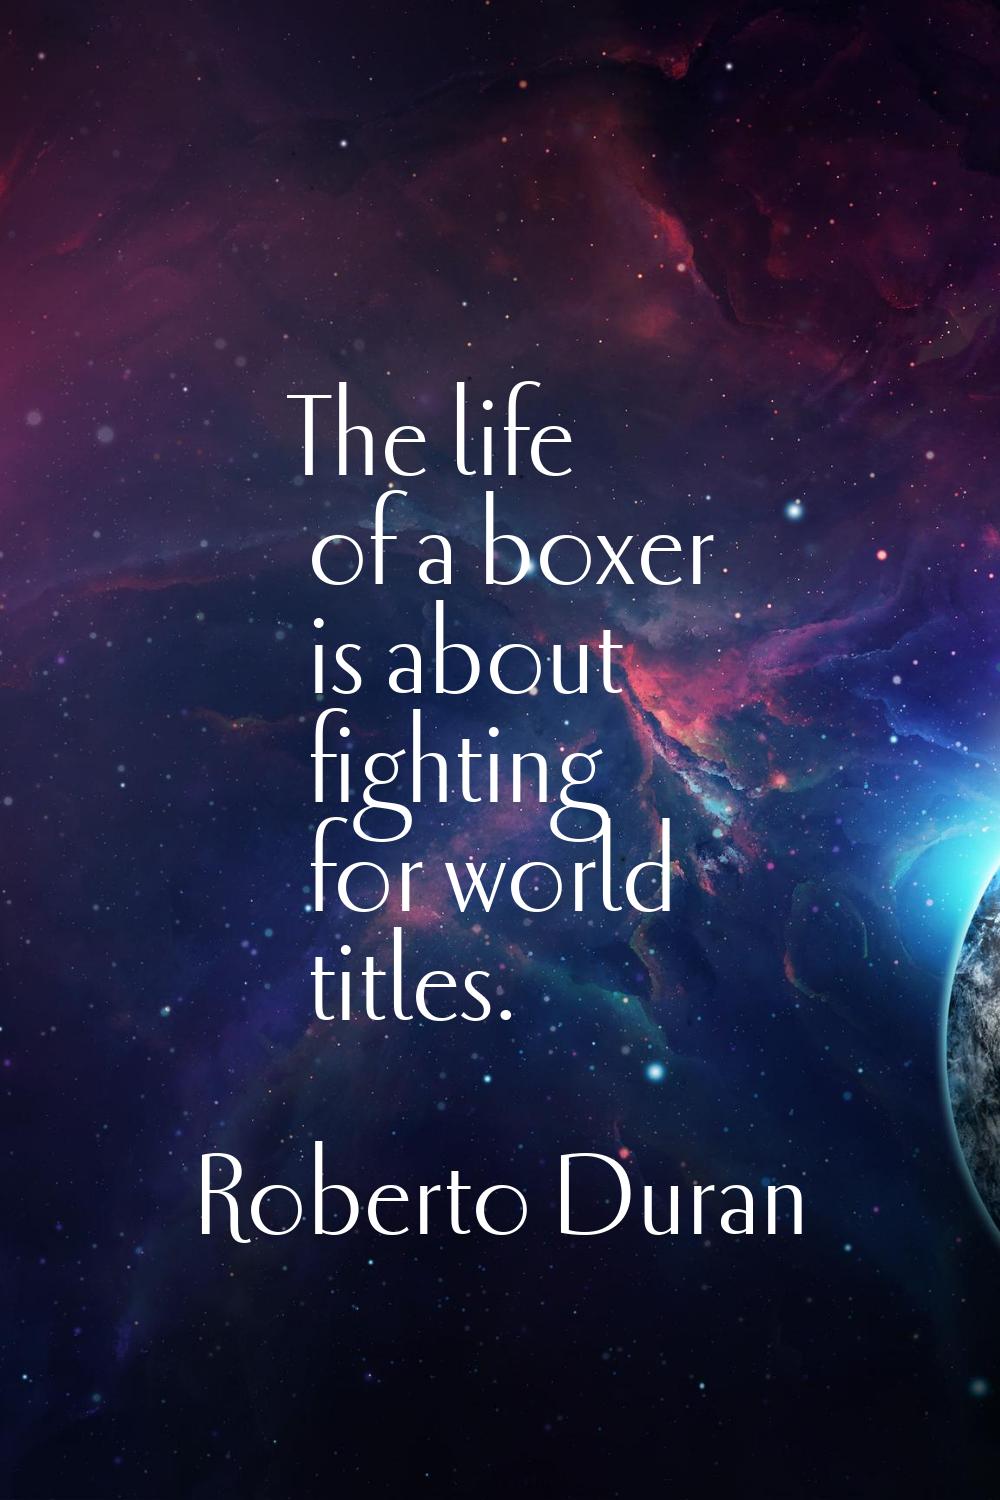 The life of a boxer is about fighting for world titles.